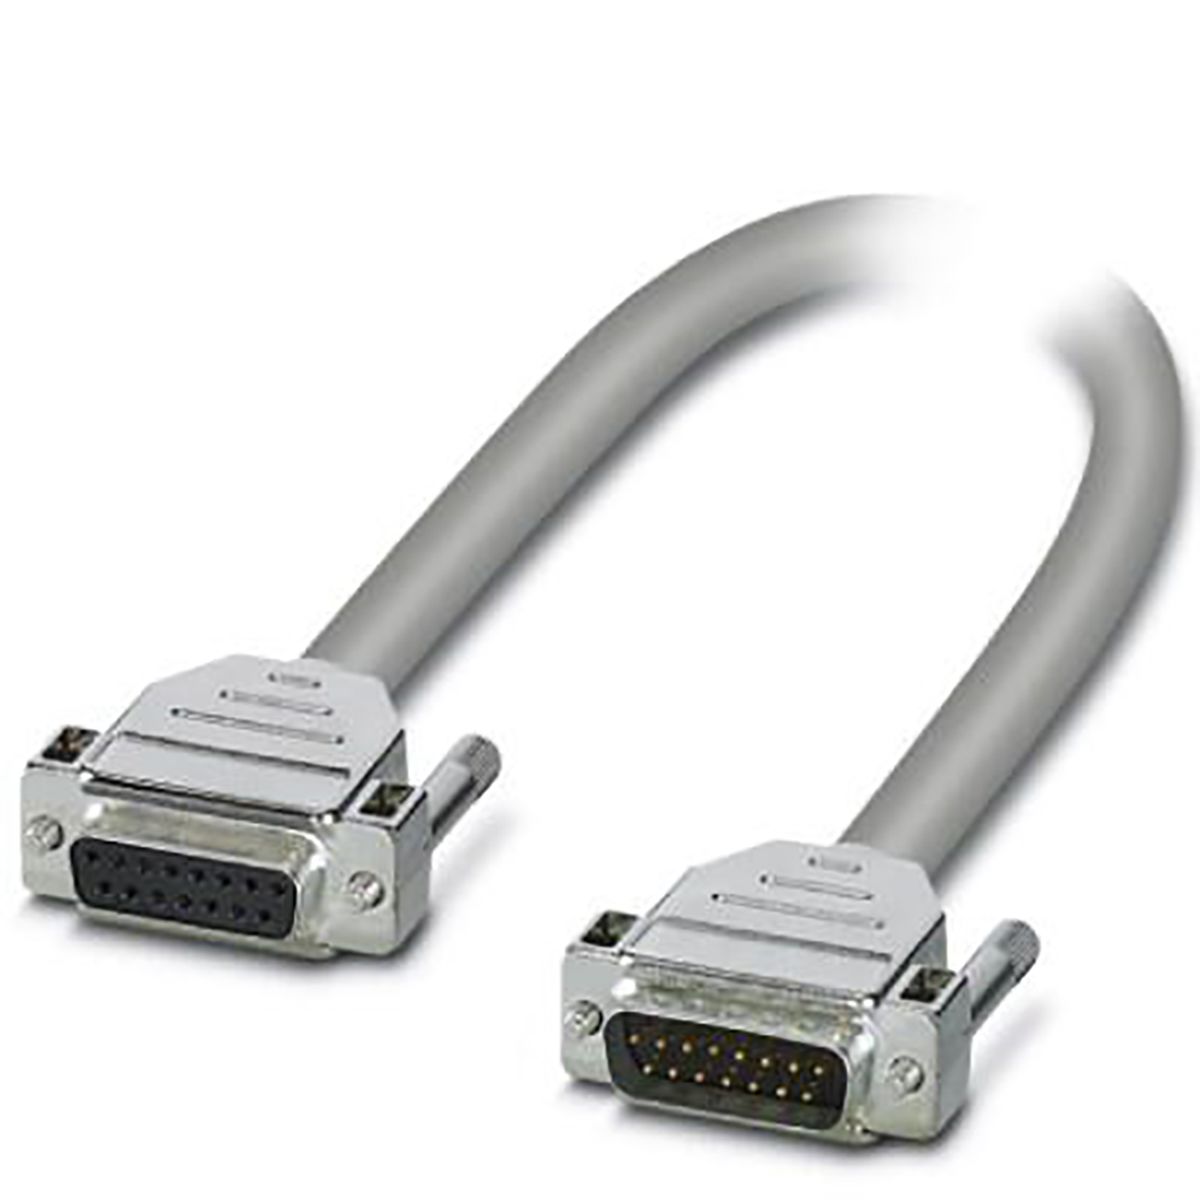 Phoenix Contact 3m 15 pin D-sub to 15 pin D-sub Serial Cable